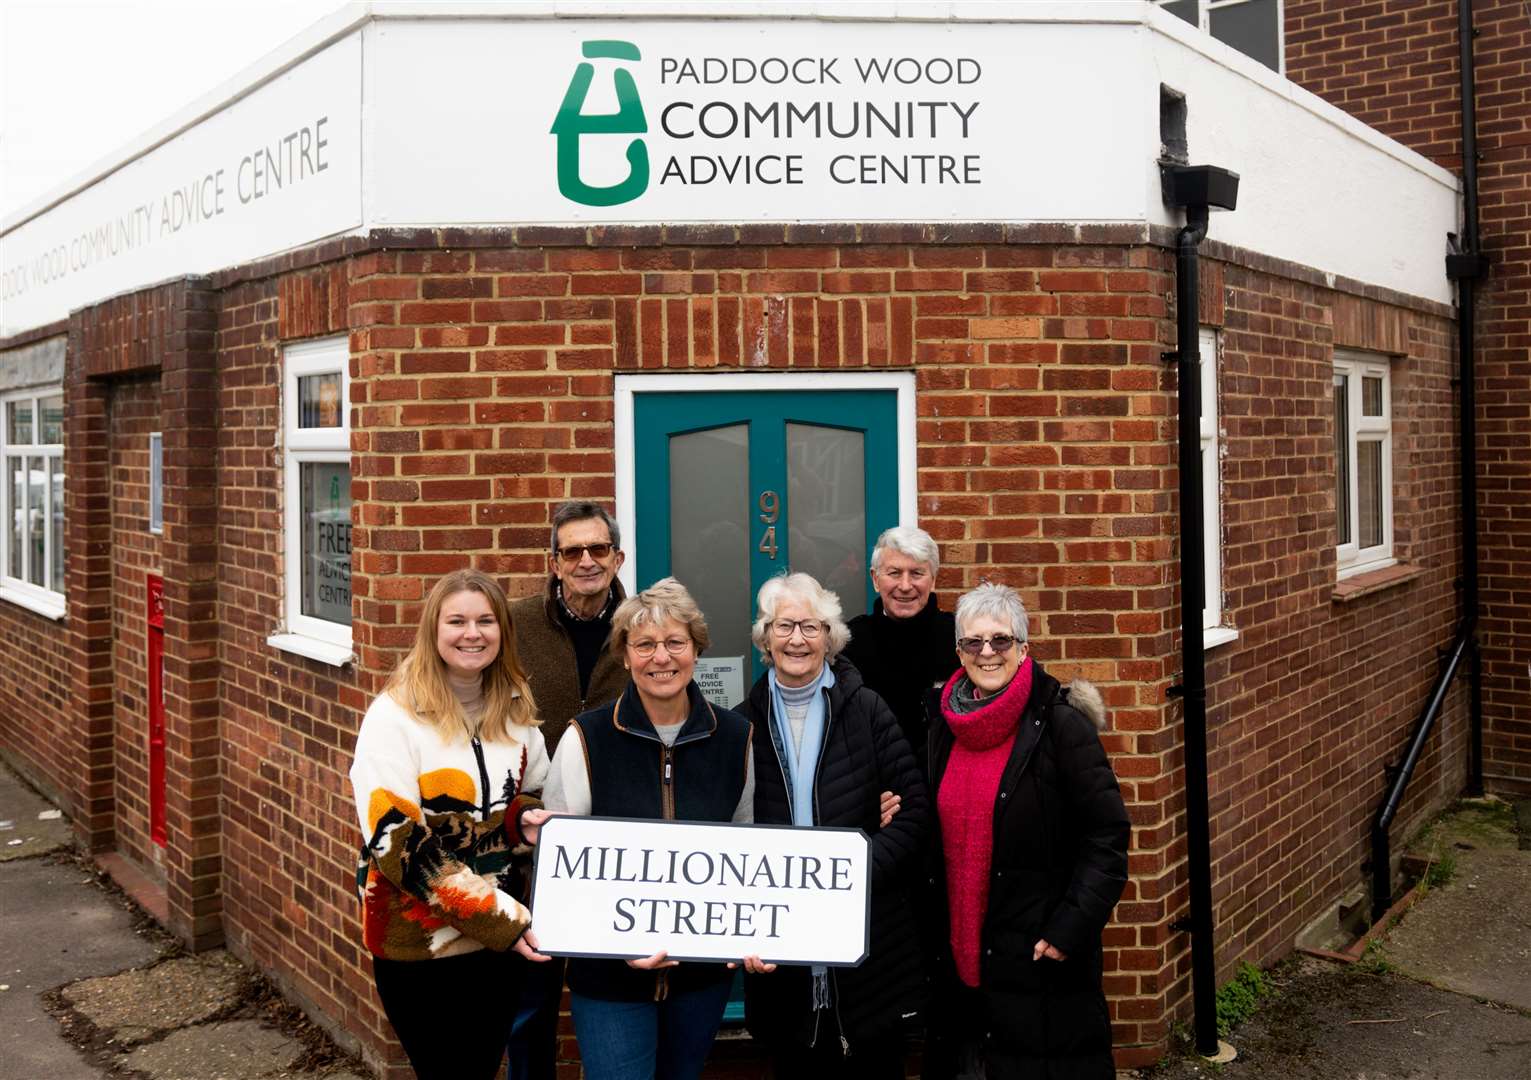 The Paddock Wood Community Advice Centre has been awarded £15,000 by the People's Postcode Lottery. Picture: The People's Postcode Lottery